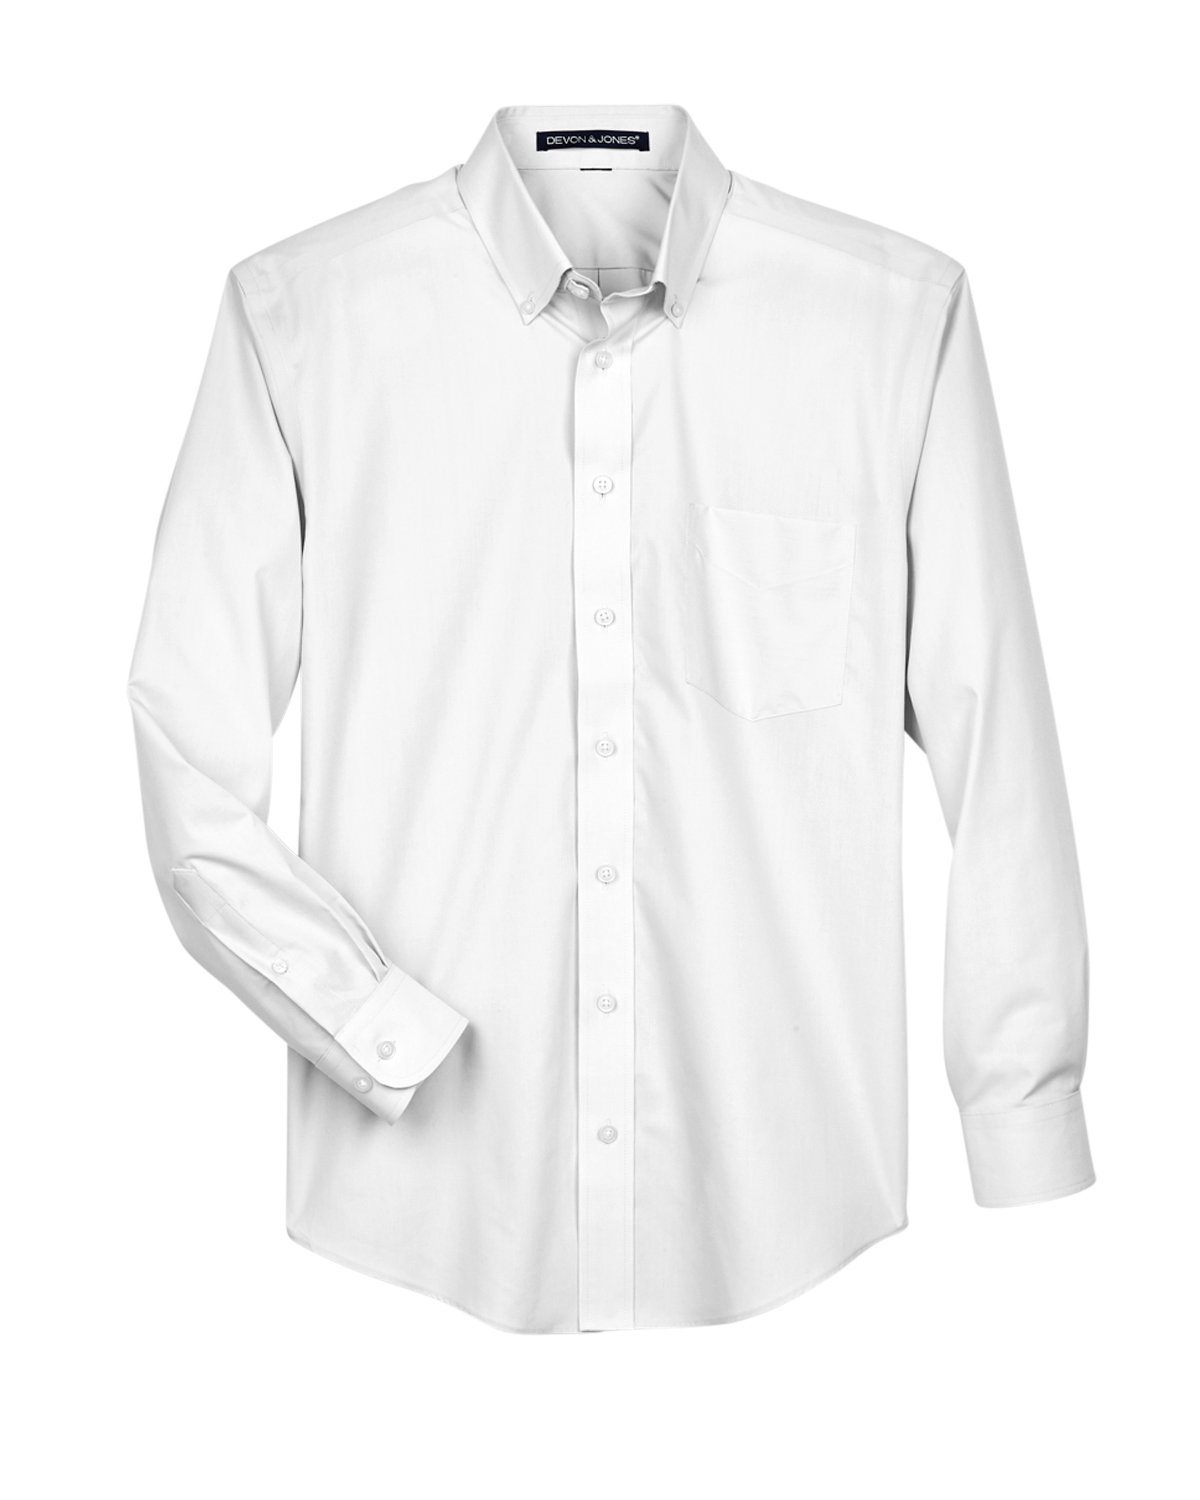 Picture of Devon & Jones Men's Crown Woven Collection™ Solid Broadcloth